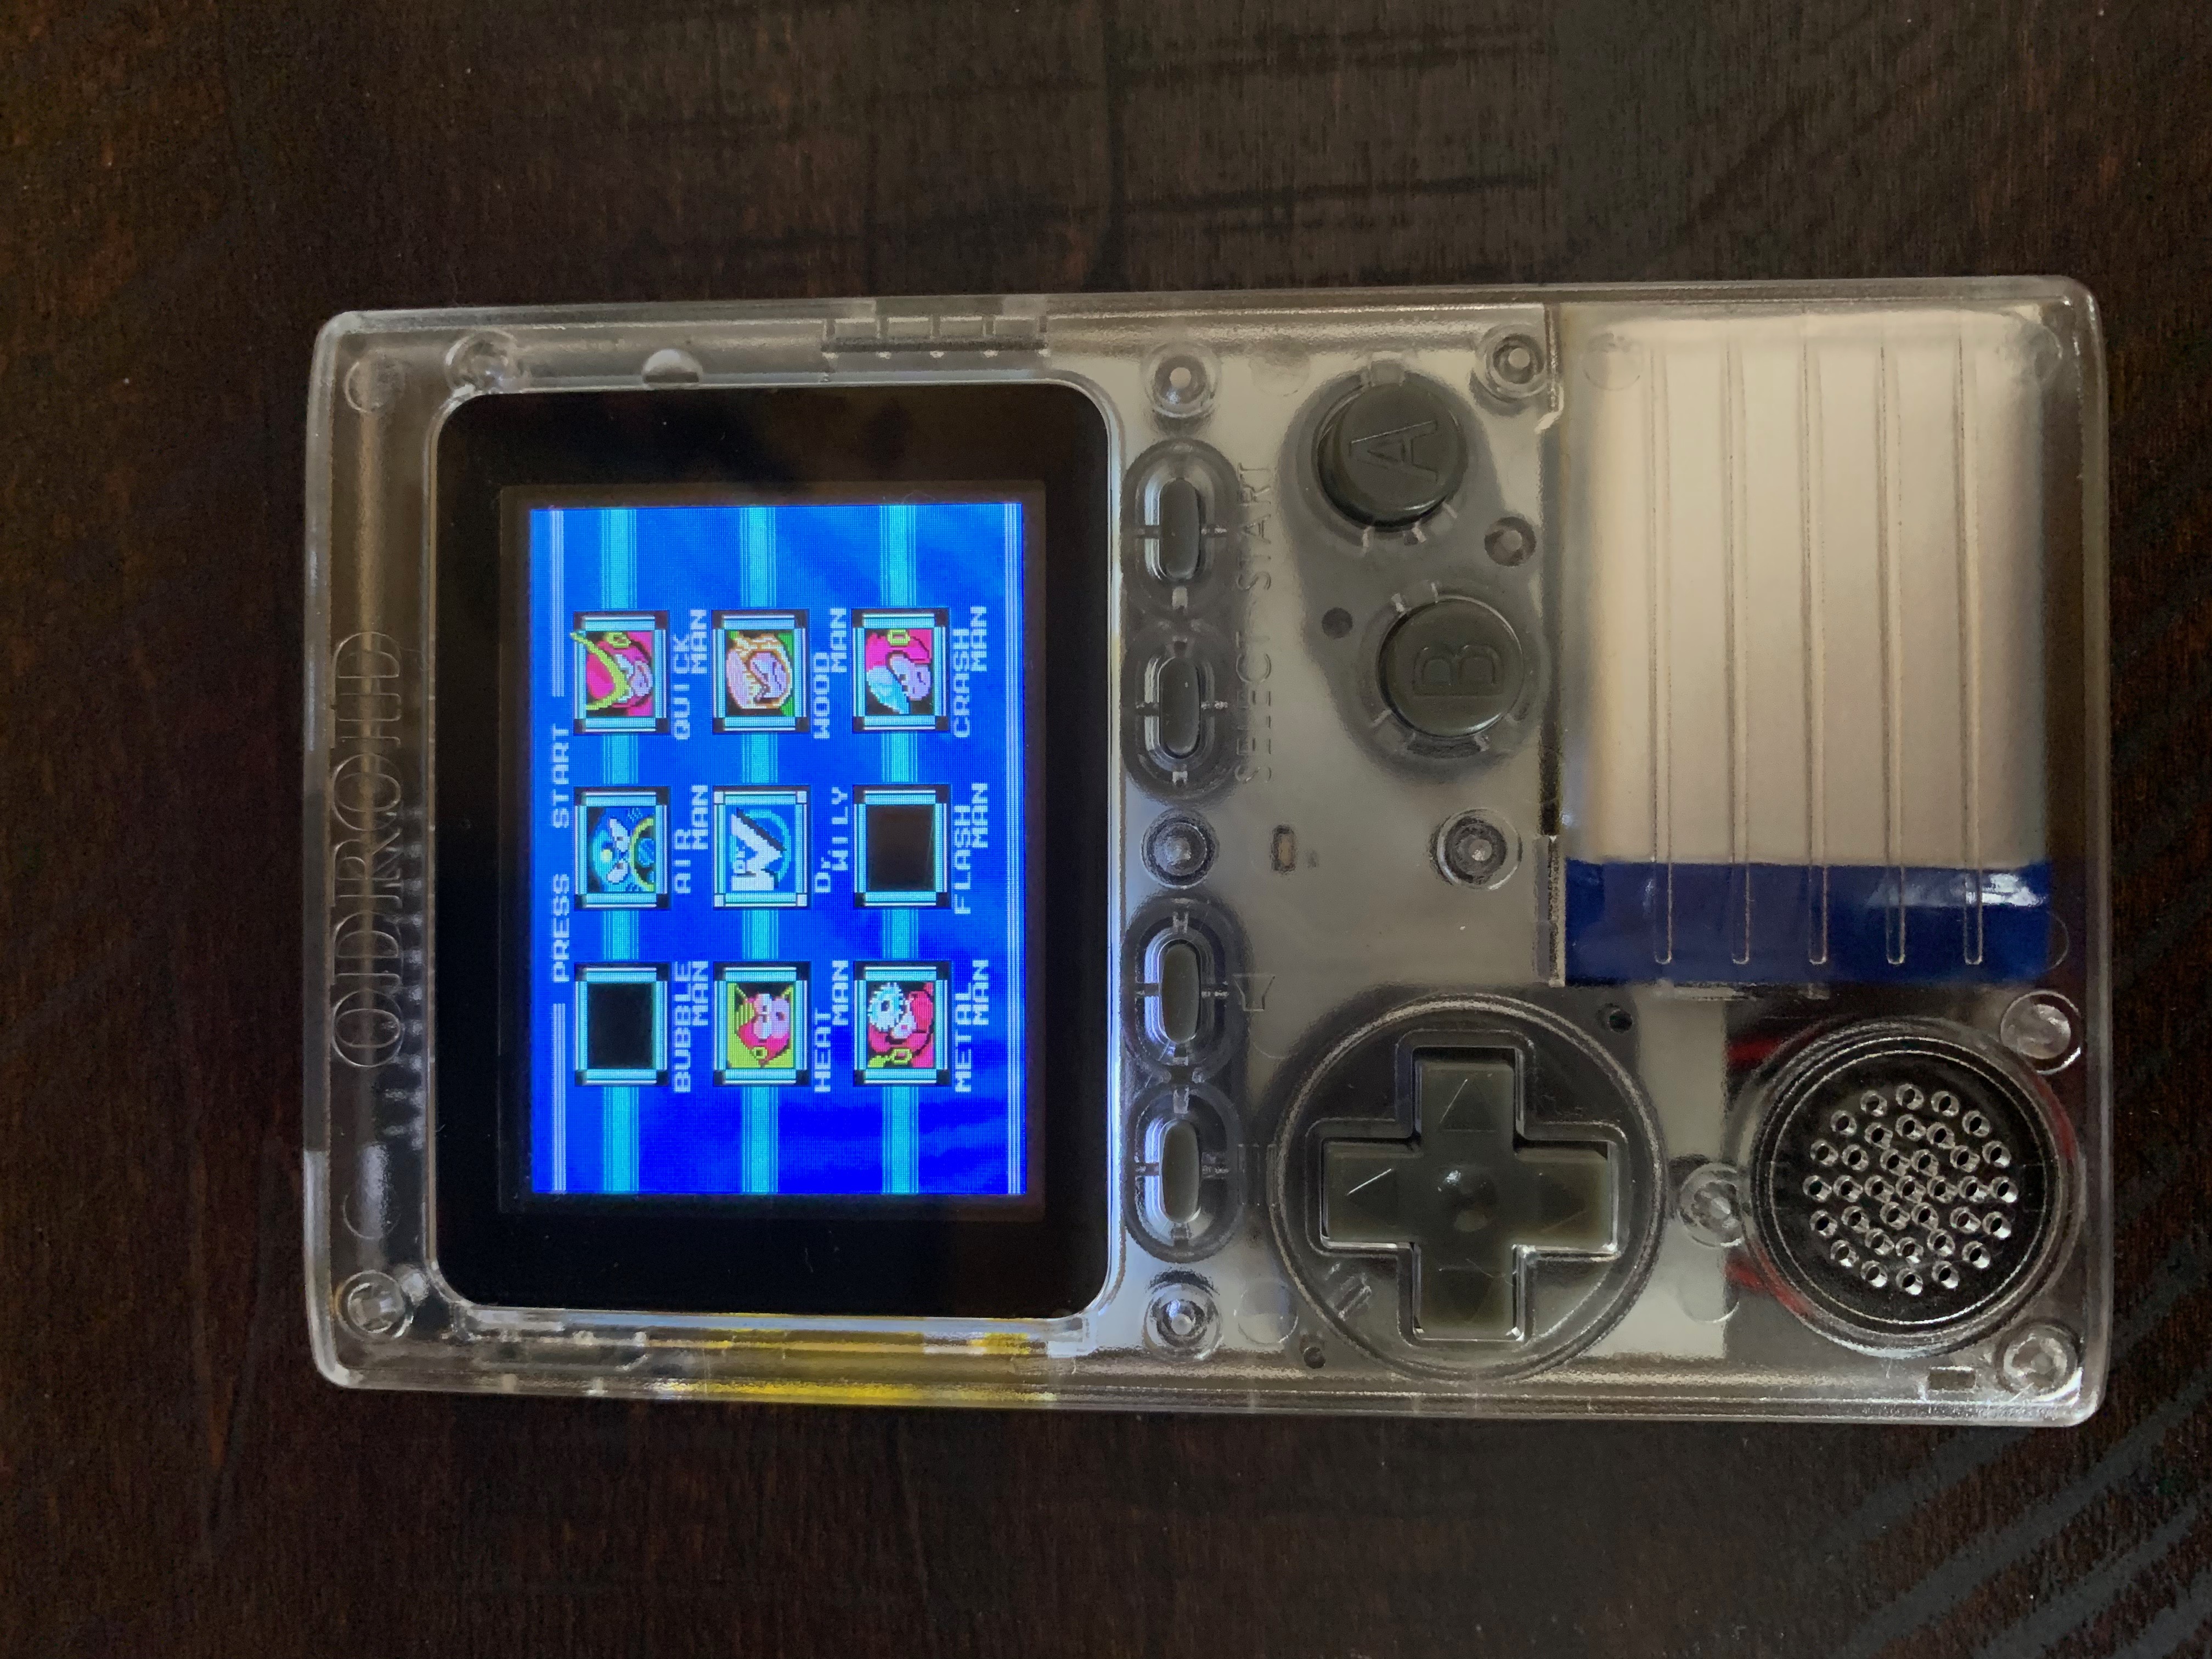 ODROID GO front view